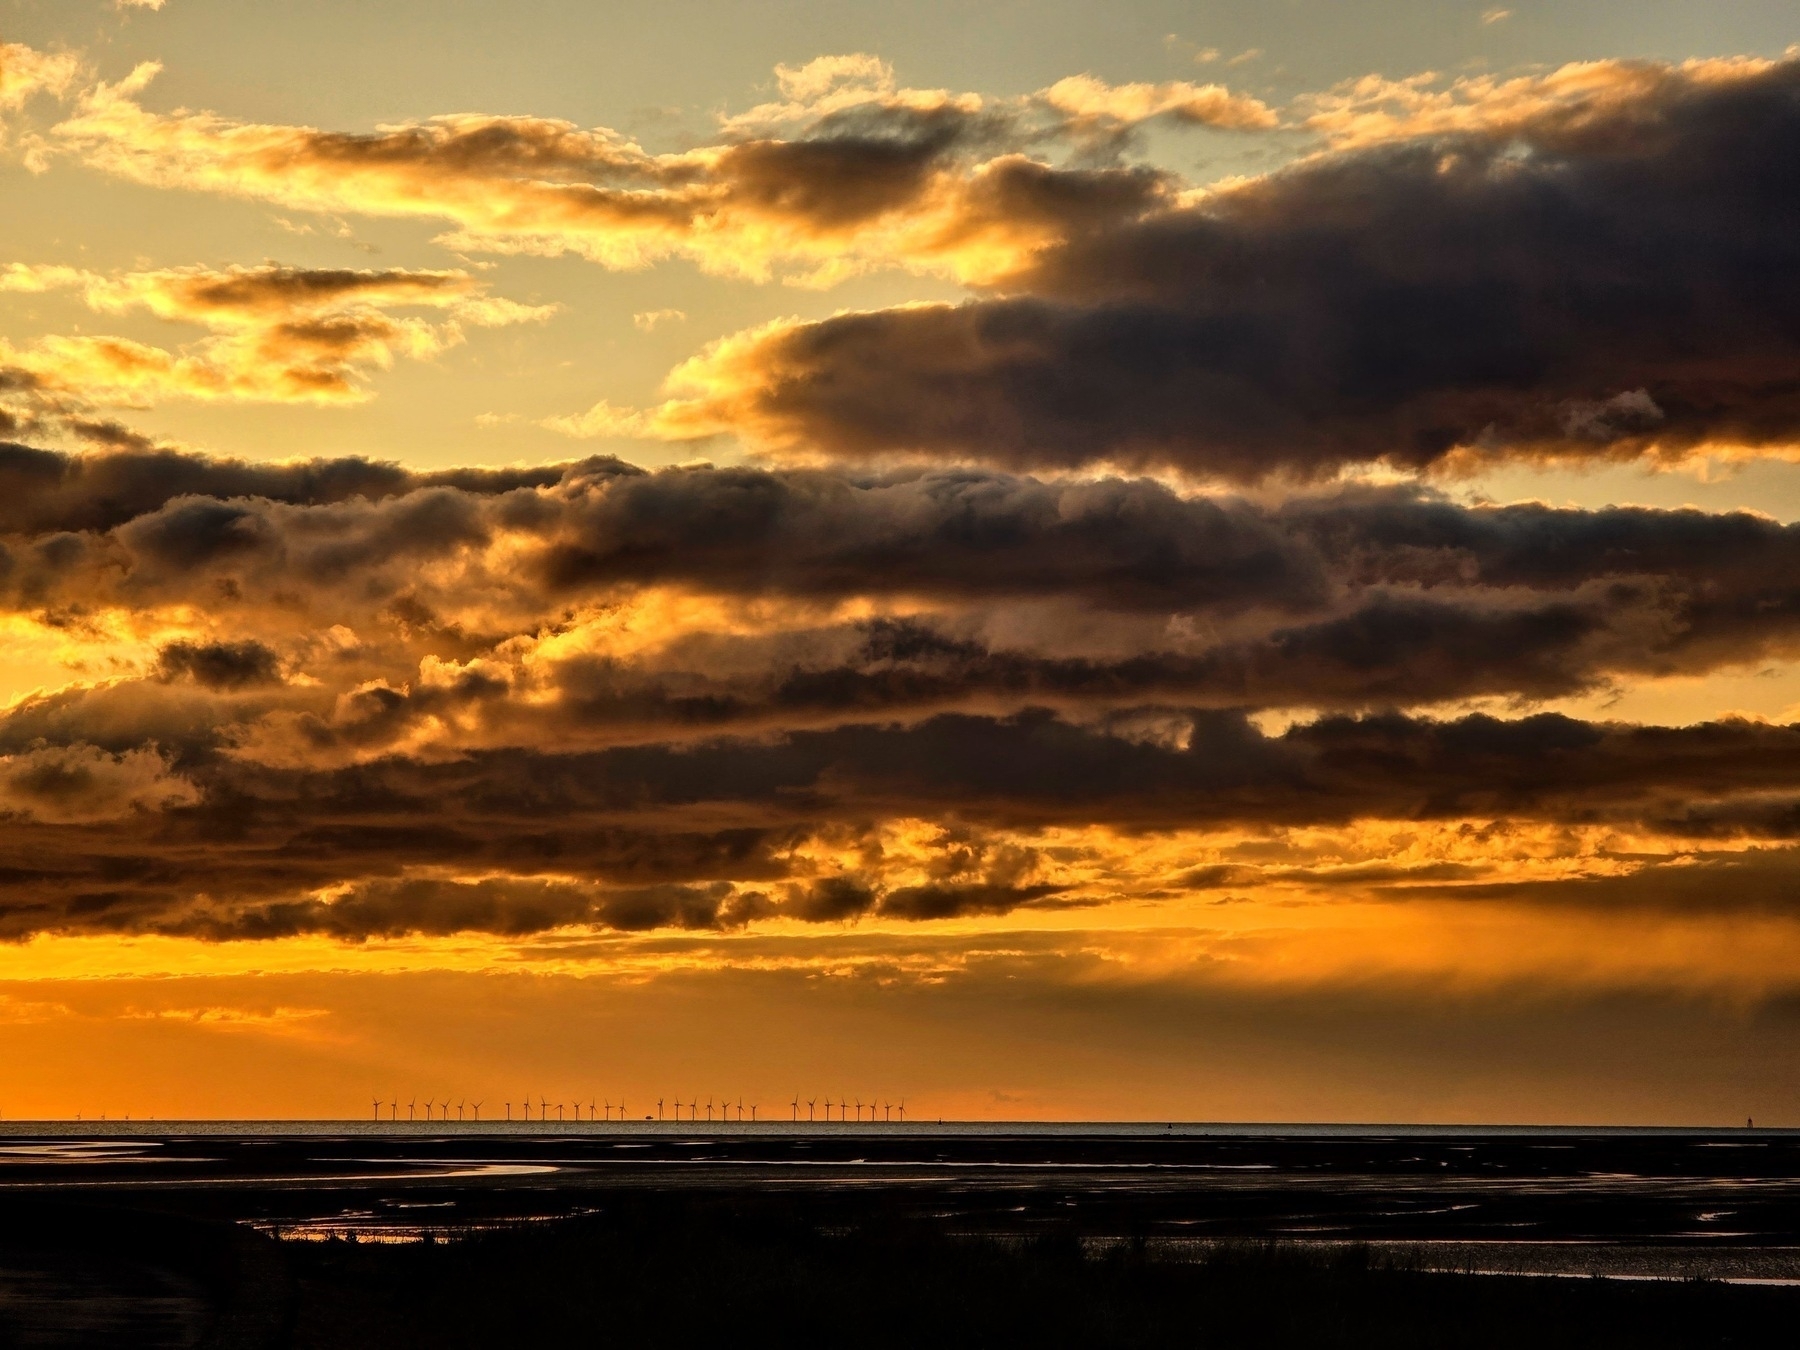 sunset os orange and yellow over a bay, the tide is out, wind turbines stand on the horizon